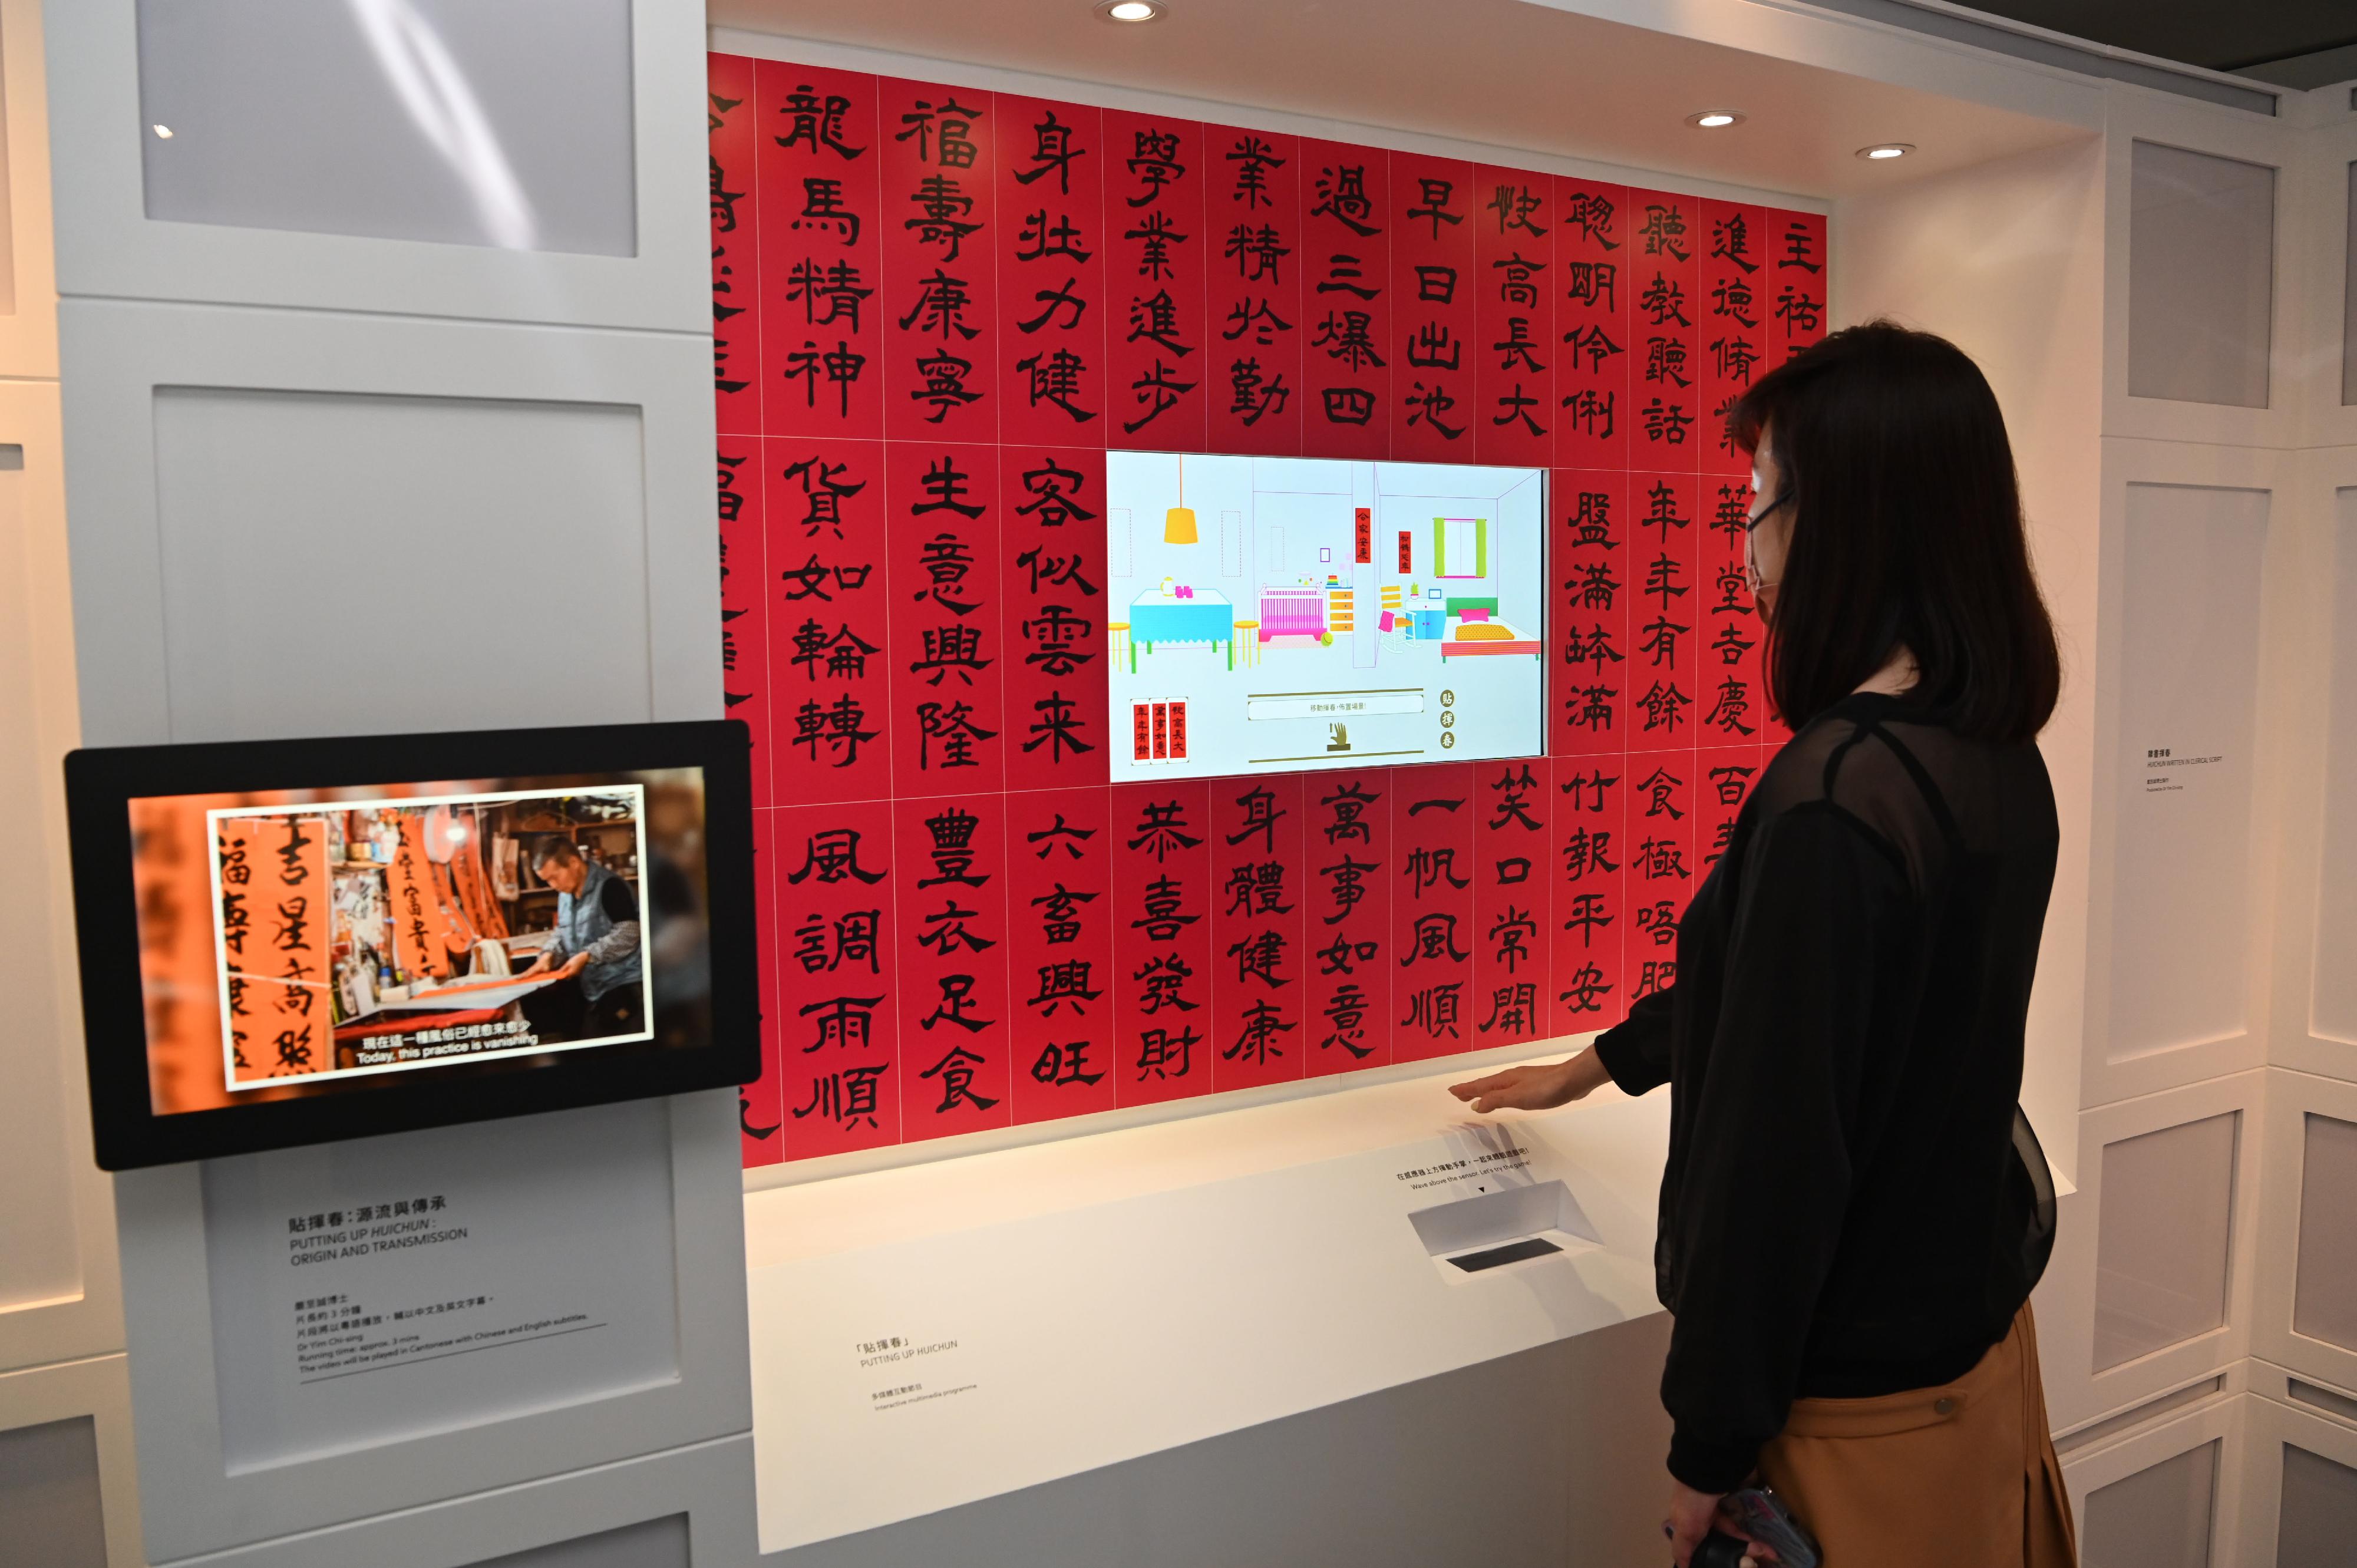 A new exhibition, "Traces of Human Touch", organised by the Intangible Cultural Heritage Office will be open to the public from tomorrow (May 19). Photo shows a video and an interactive game of the intangible cultural heritage item, putting up huichun (spring scrolls). 